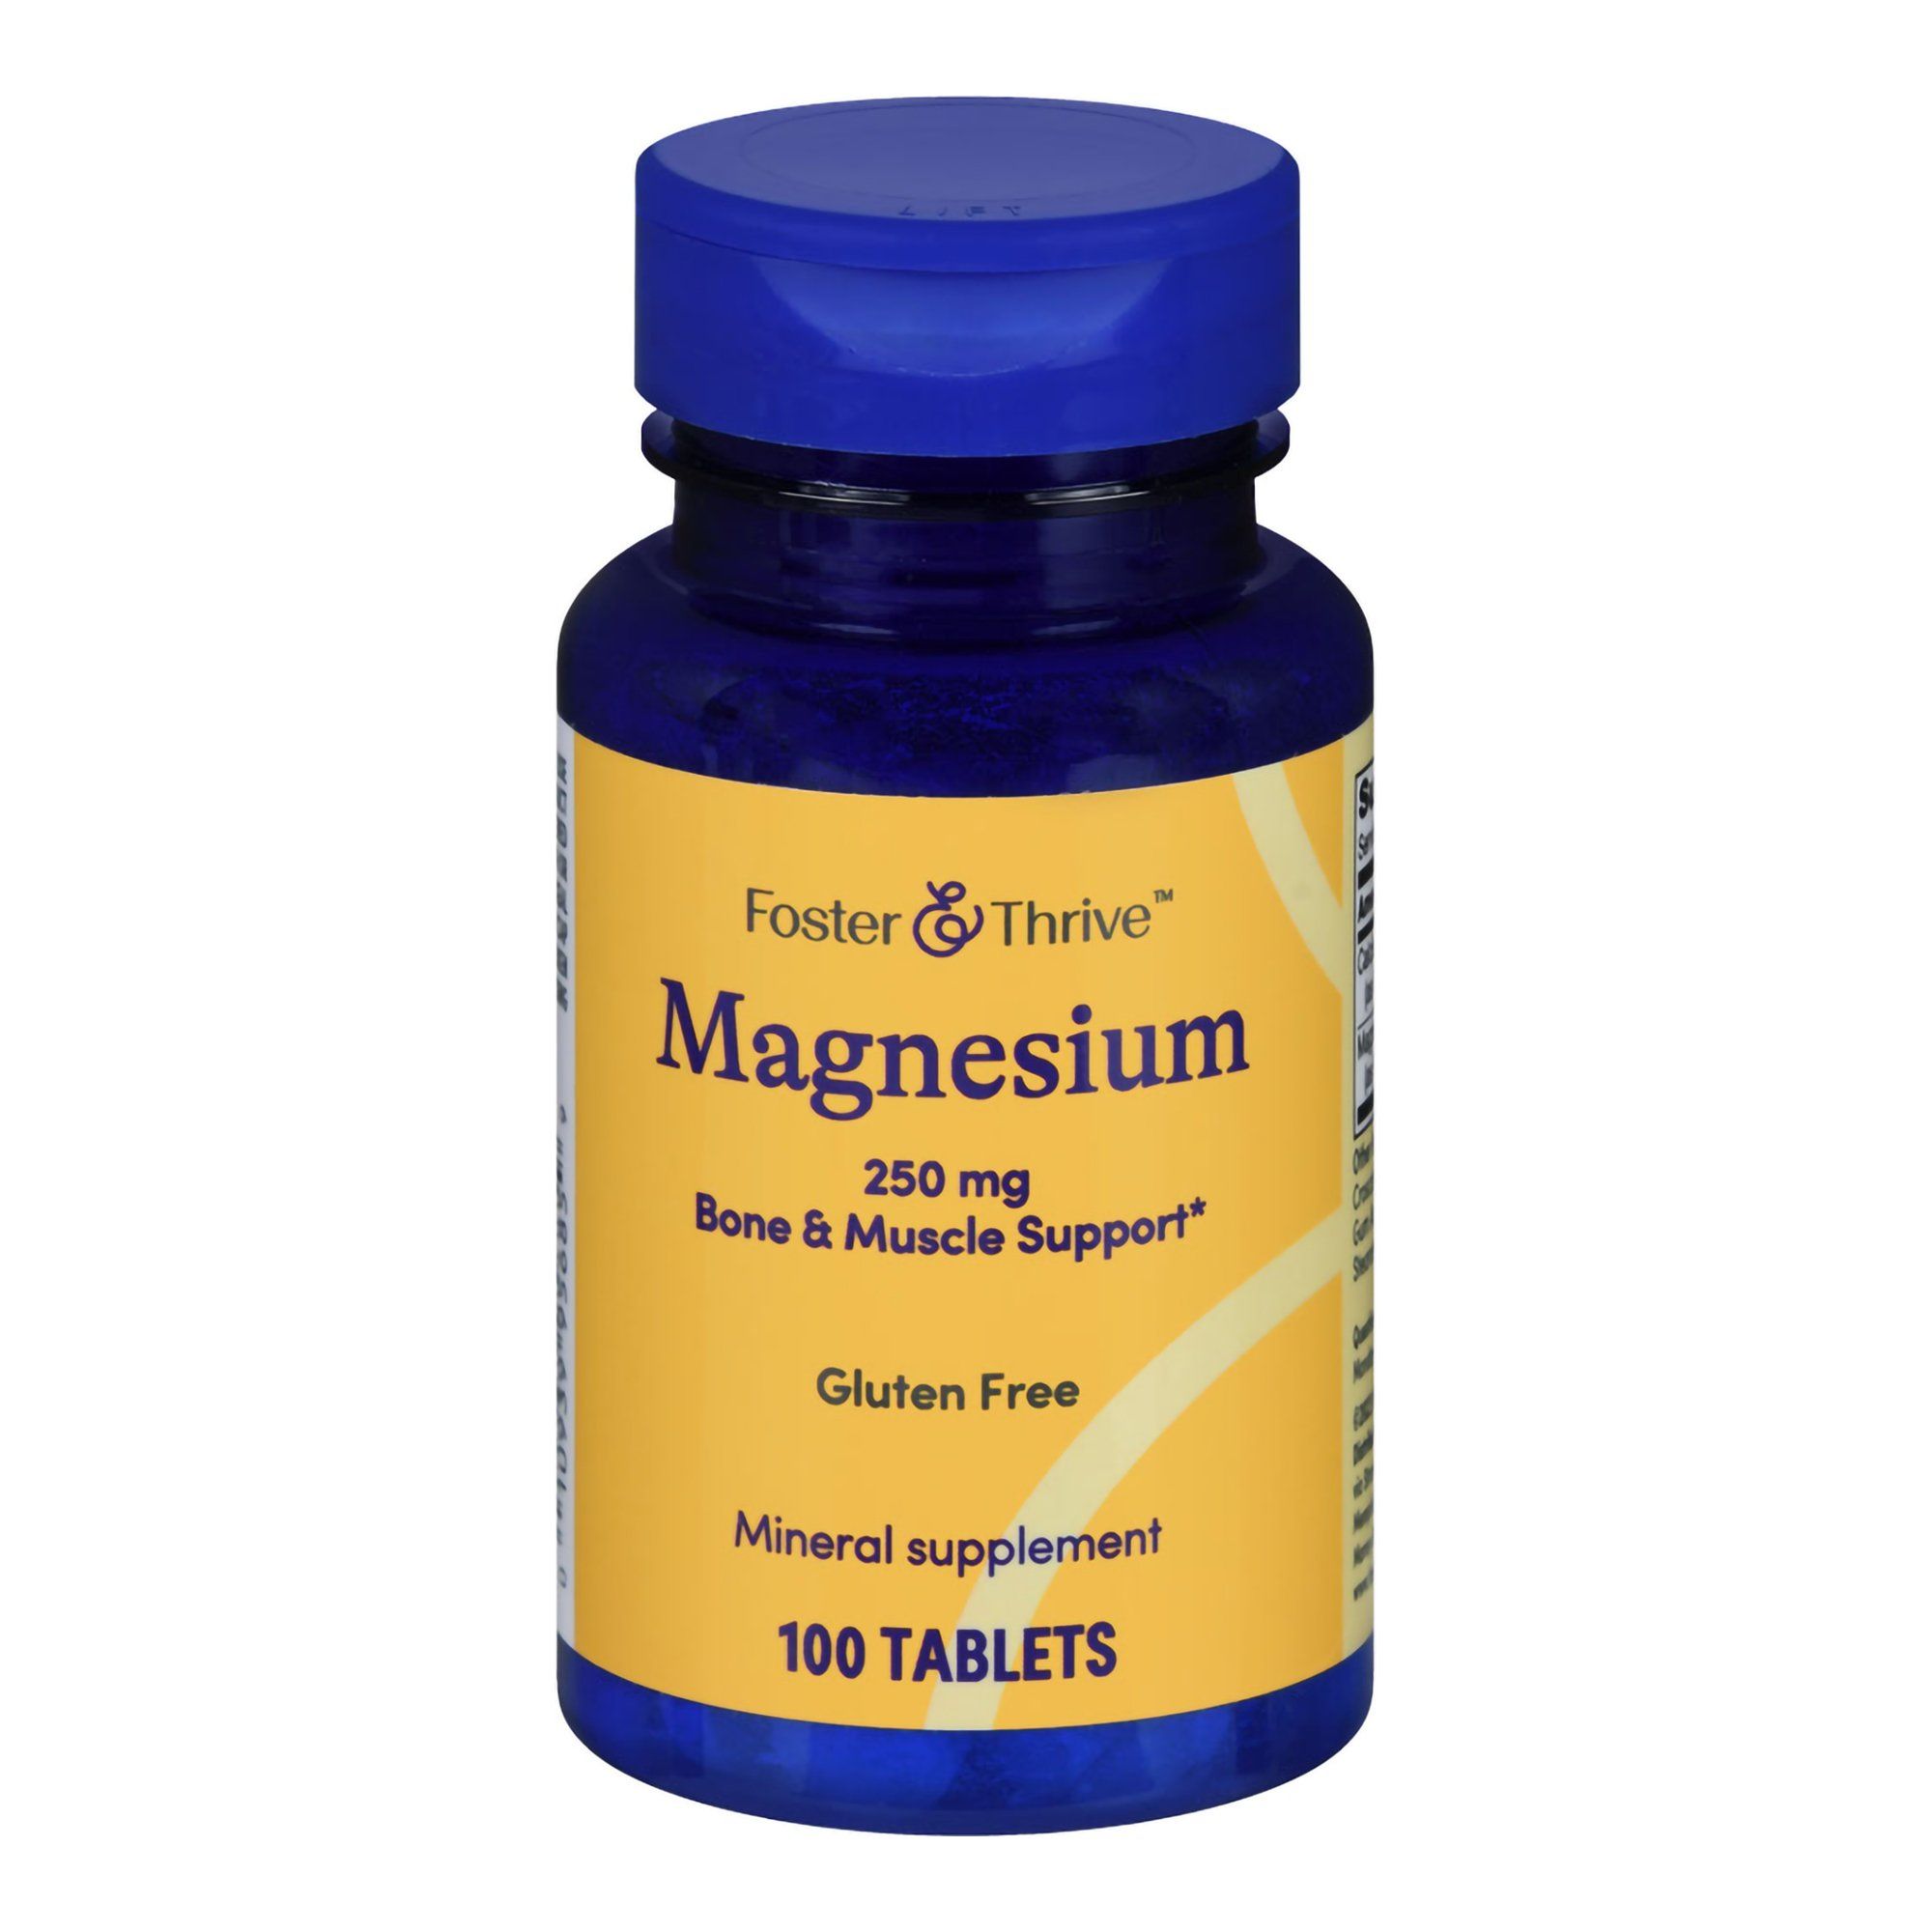 Foster & Thrive Magnesium Tablets, 250 mg  - 100 ct